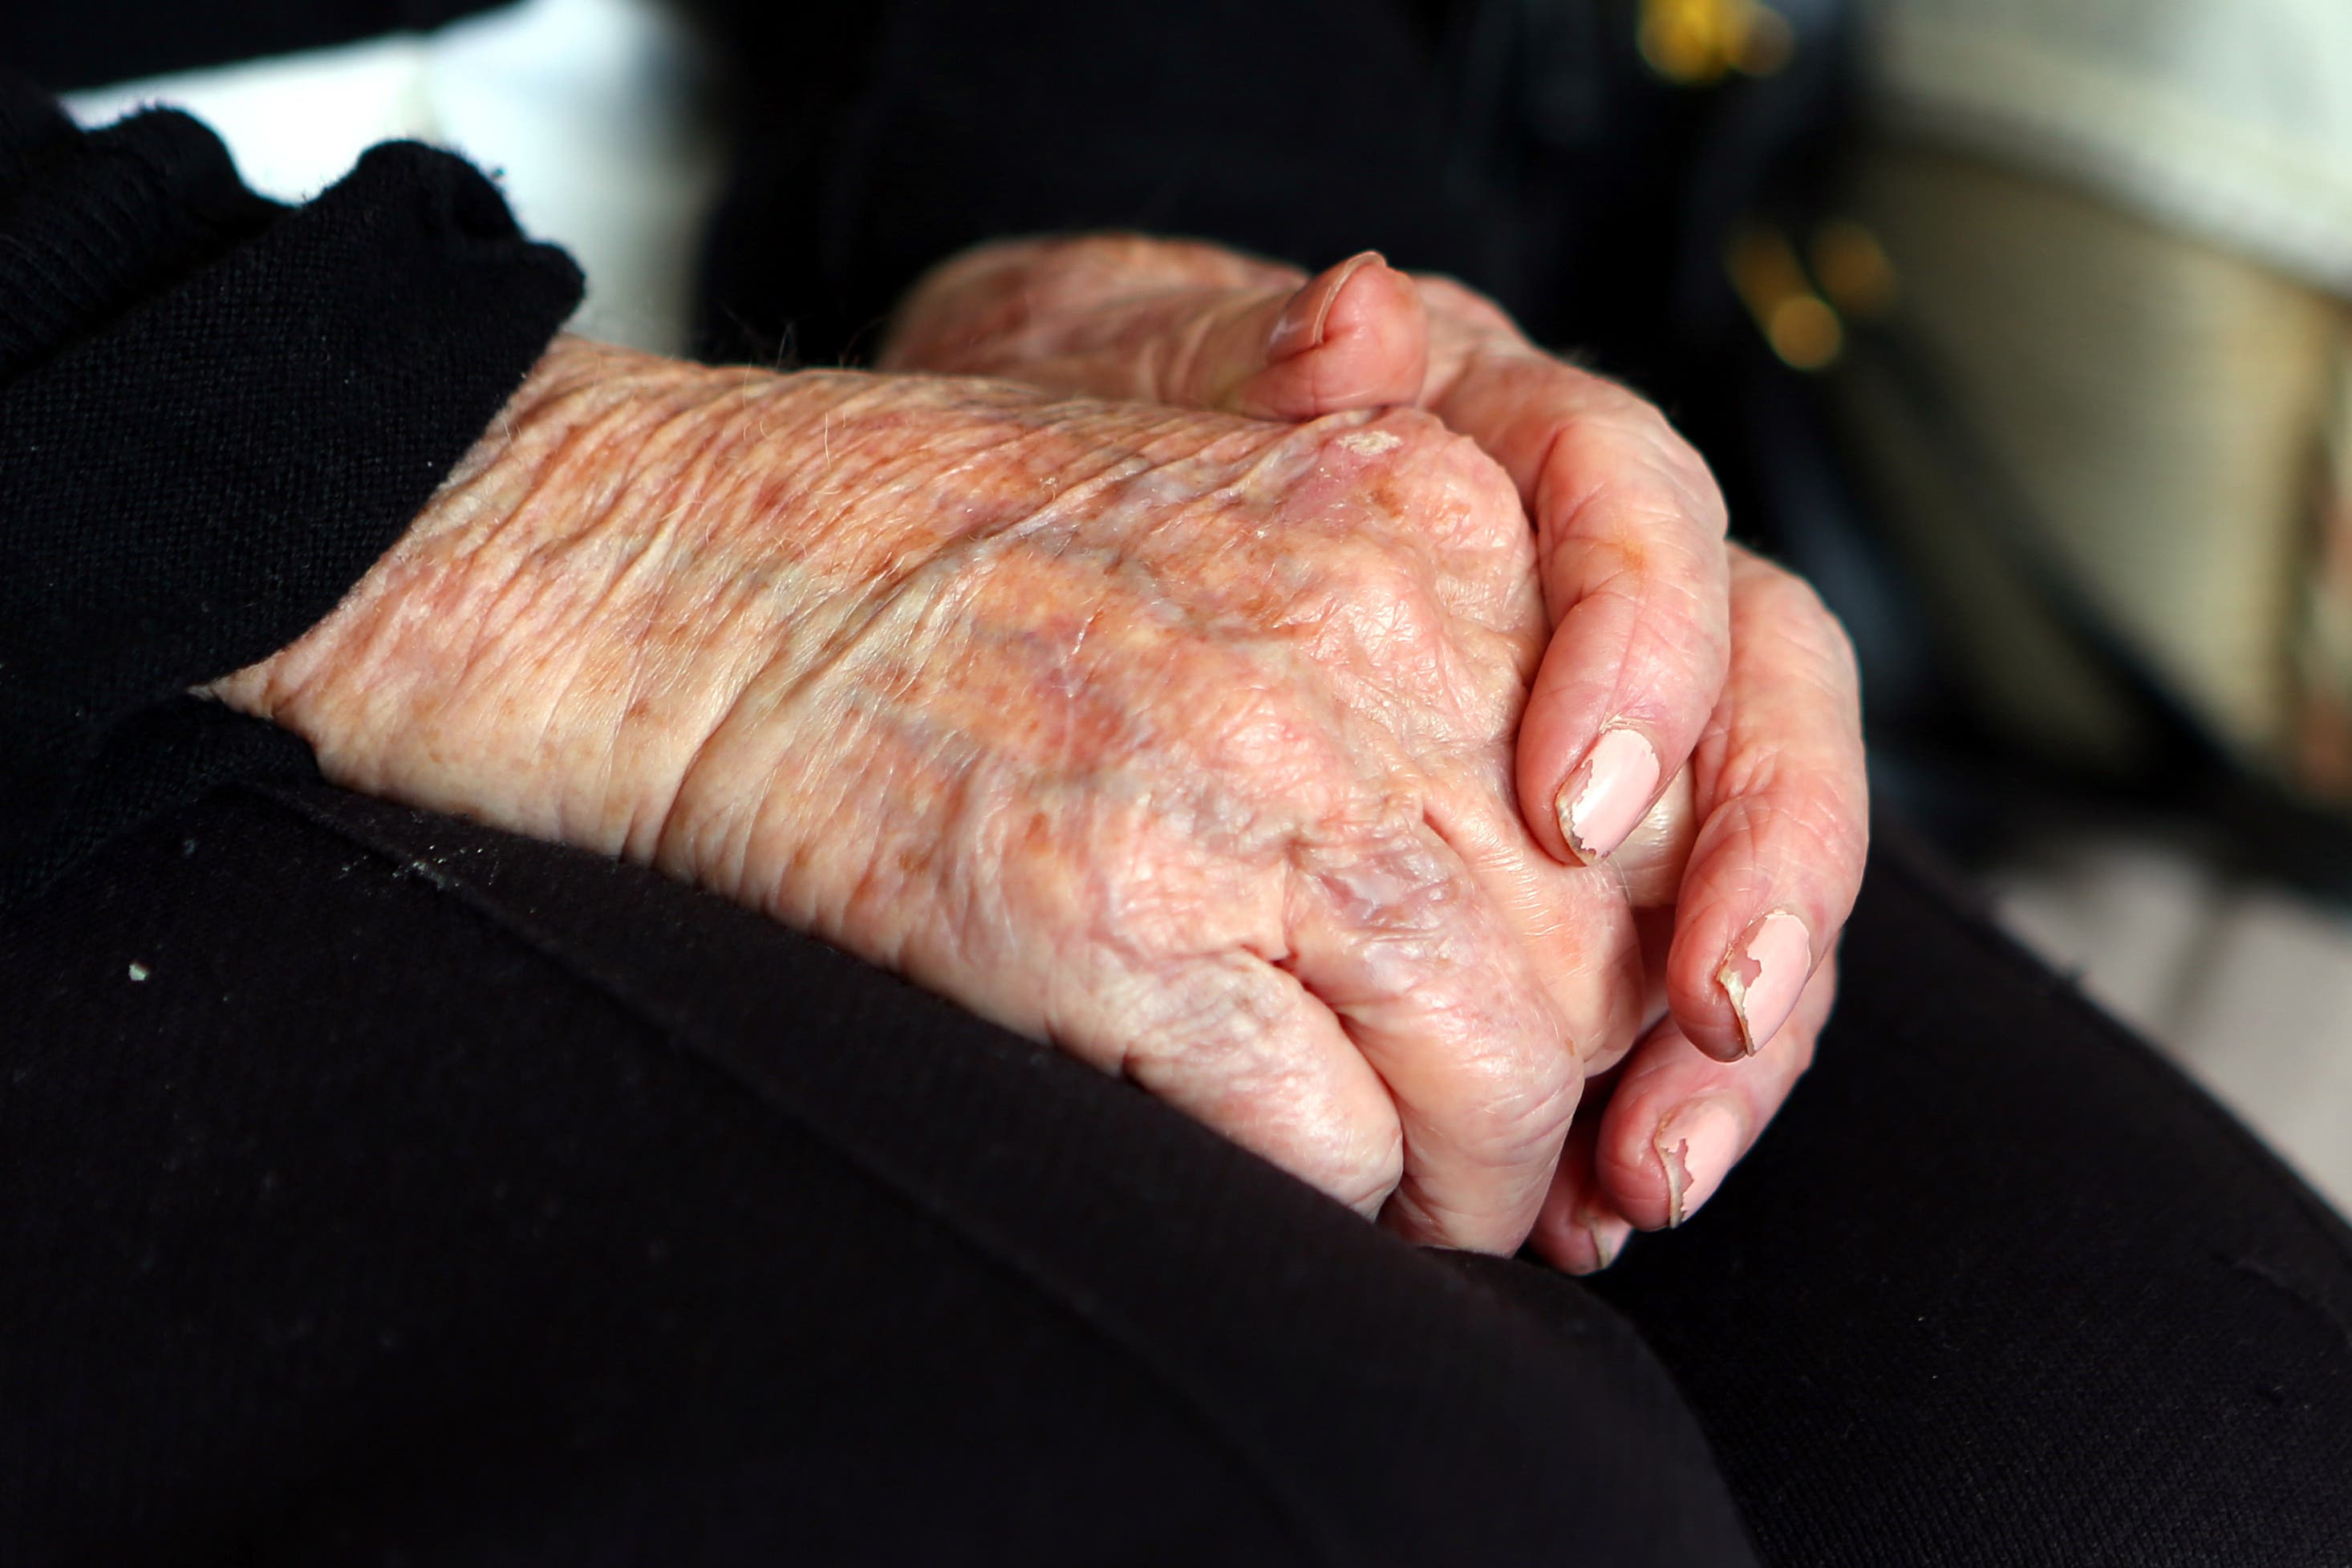 At present, less than two-thirds of people in England with dementia have a formal diagnosis